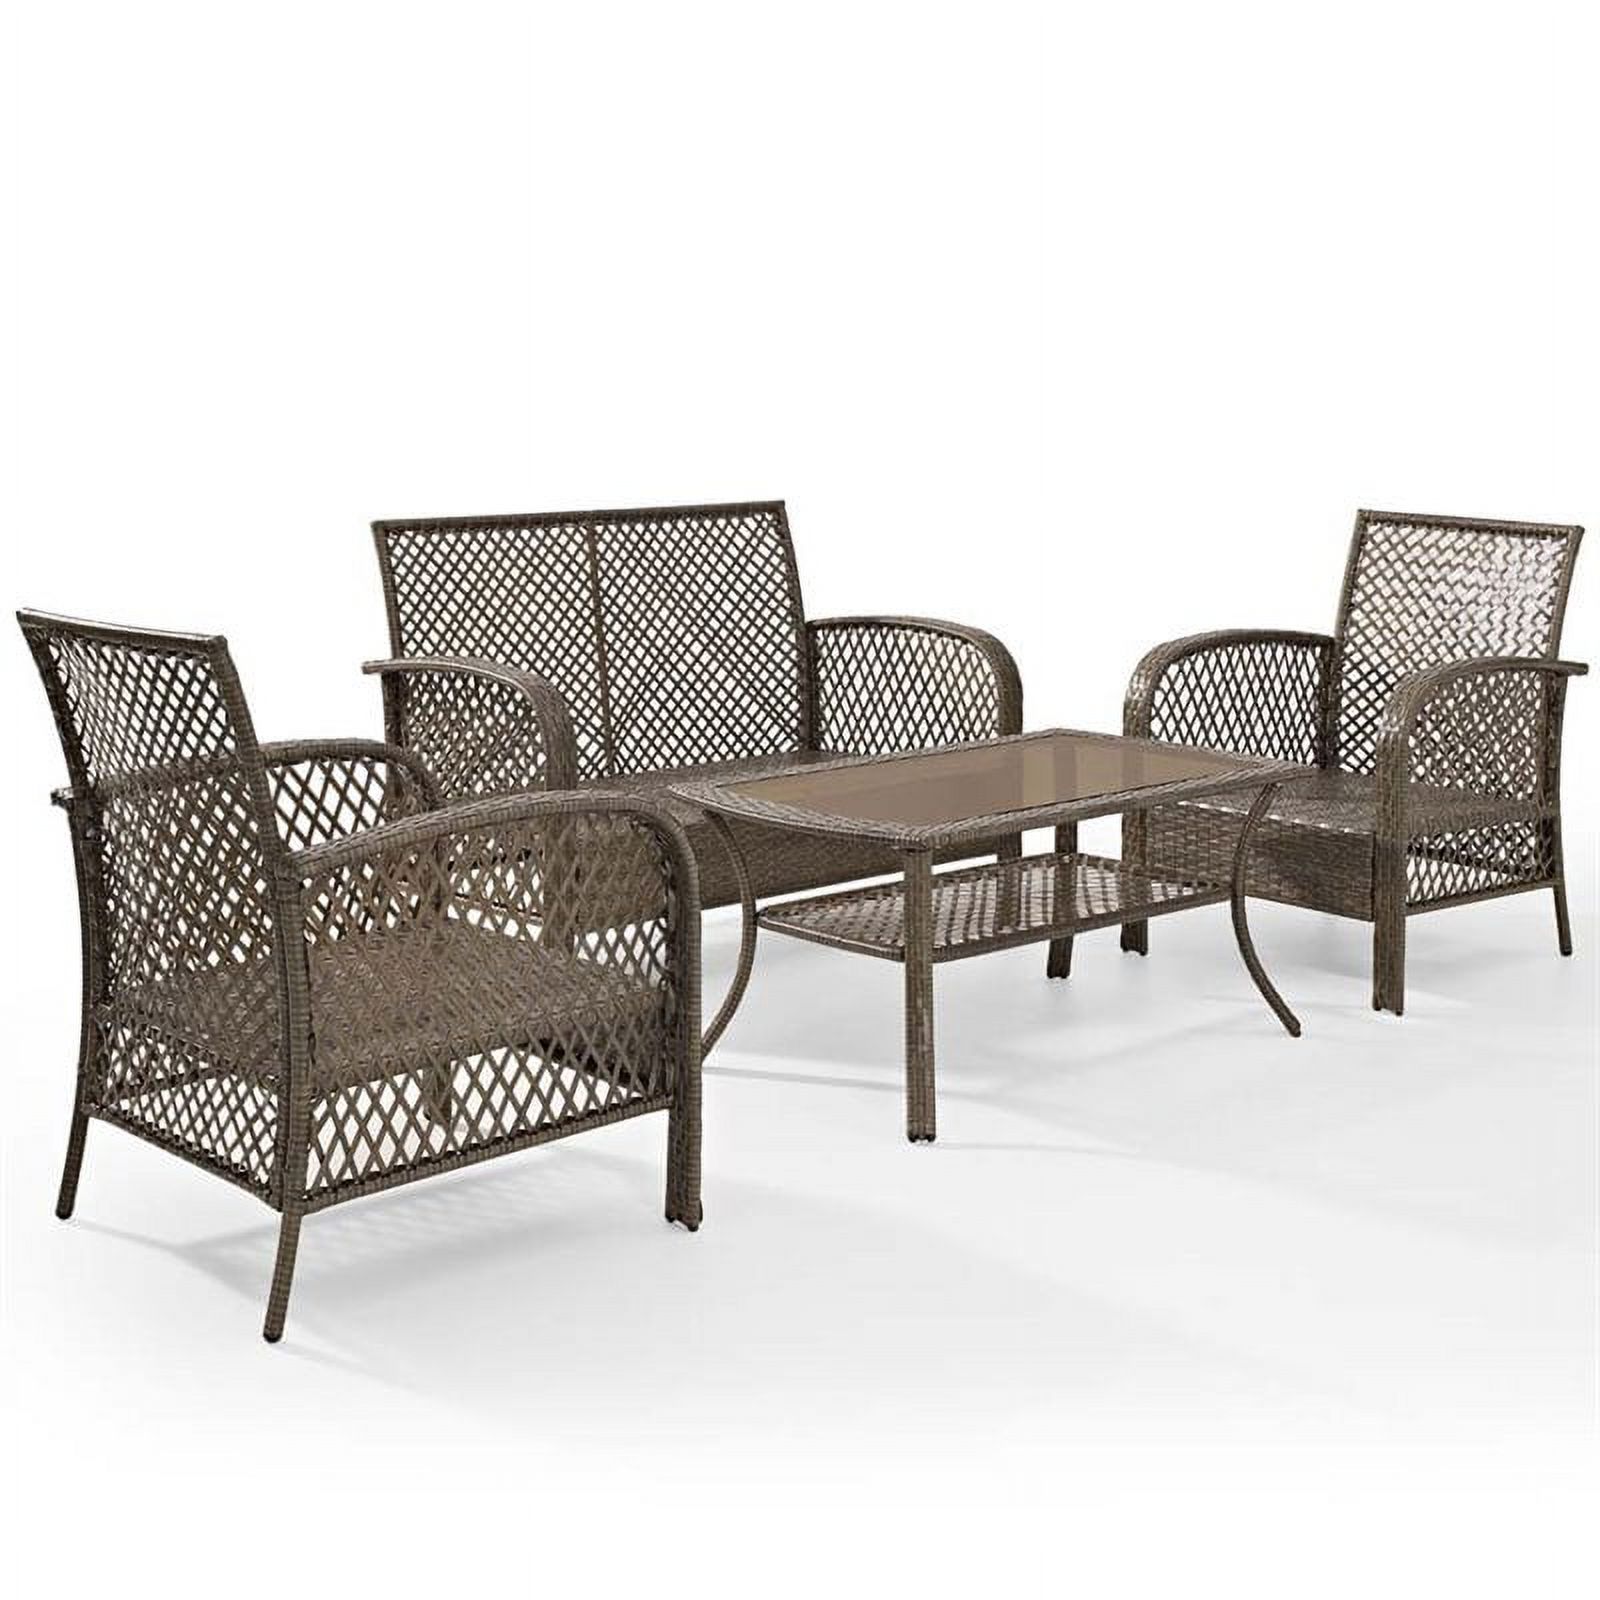 Crosley Furniture Tribeca 4 Piece Outdoor Wicker Seating Set With Sand Cushions - Loveseat, 2 Arm Chairs, And Coffee Table - image 5 of 7